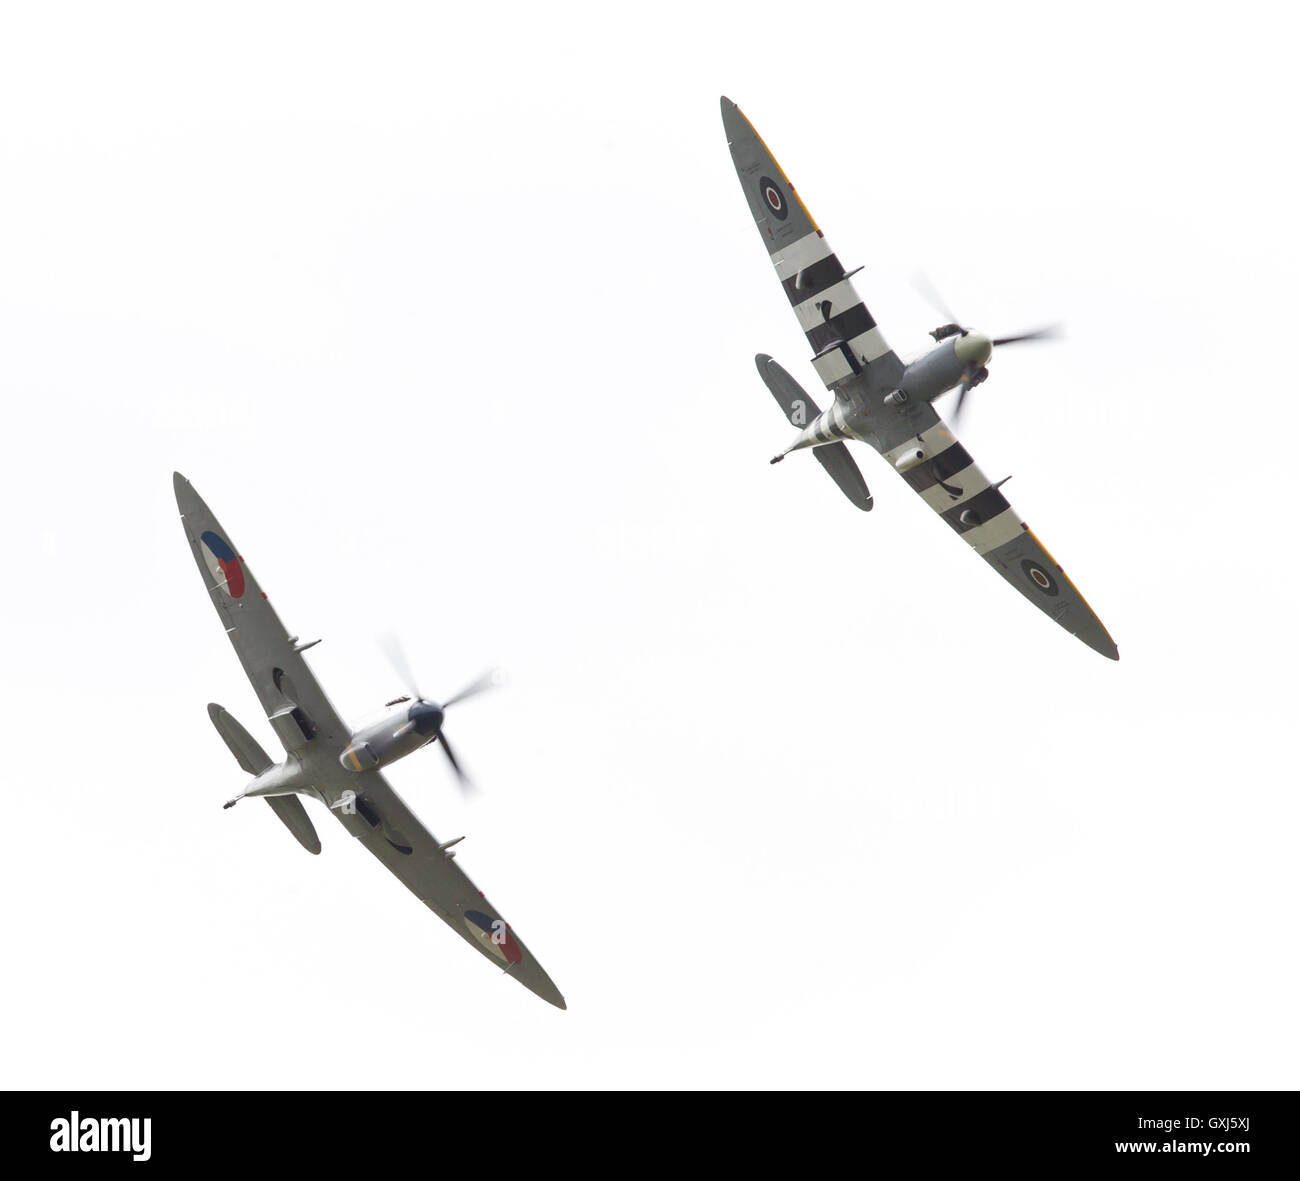 LEEUWARDEN, THE NETHERLANDS - JUNE 10, 2016: Vintage Spitfire fighter planes making a low flypast for the public at the Royal Ne Stock Photo